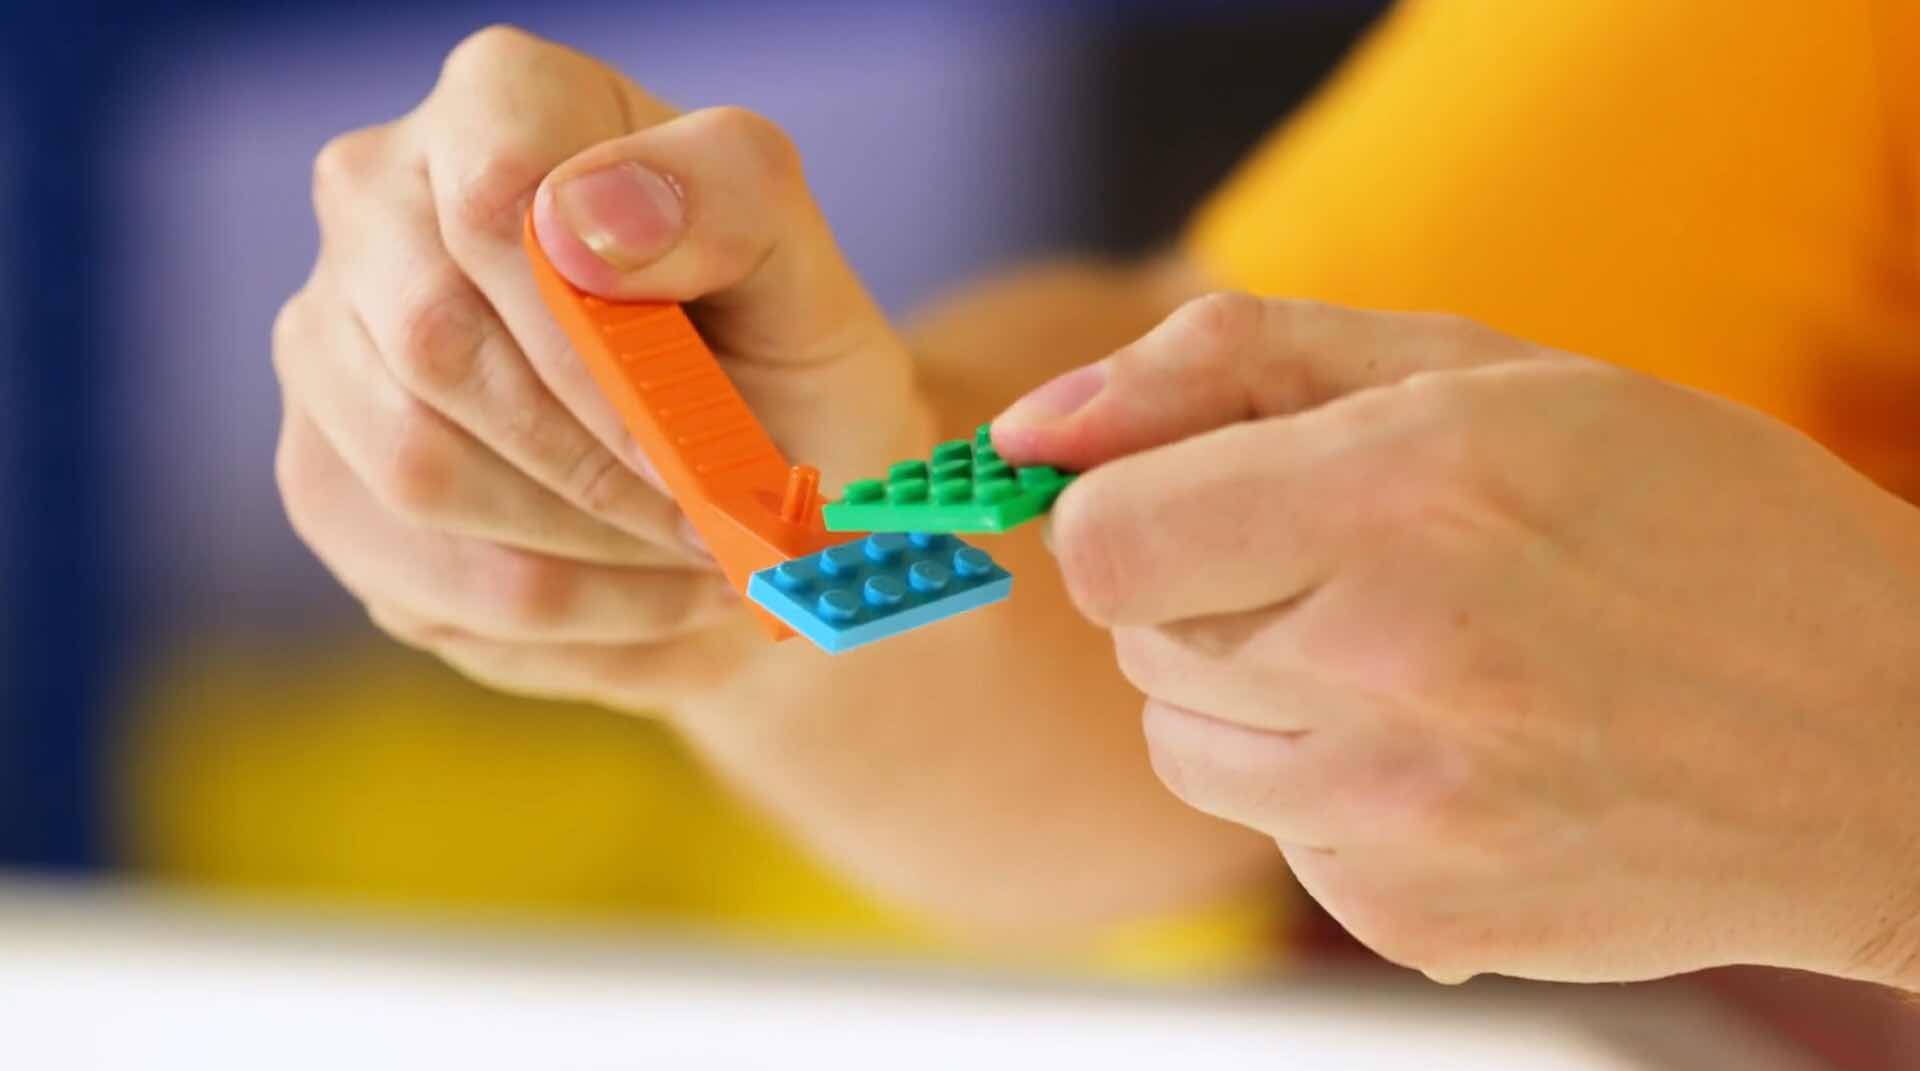 LEGO brick separator tool. ($6 for a pack of 8)